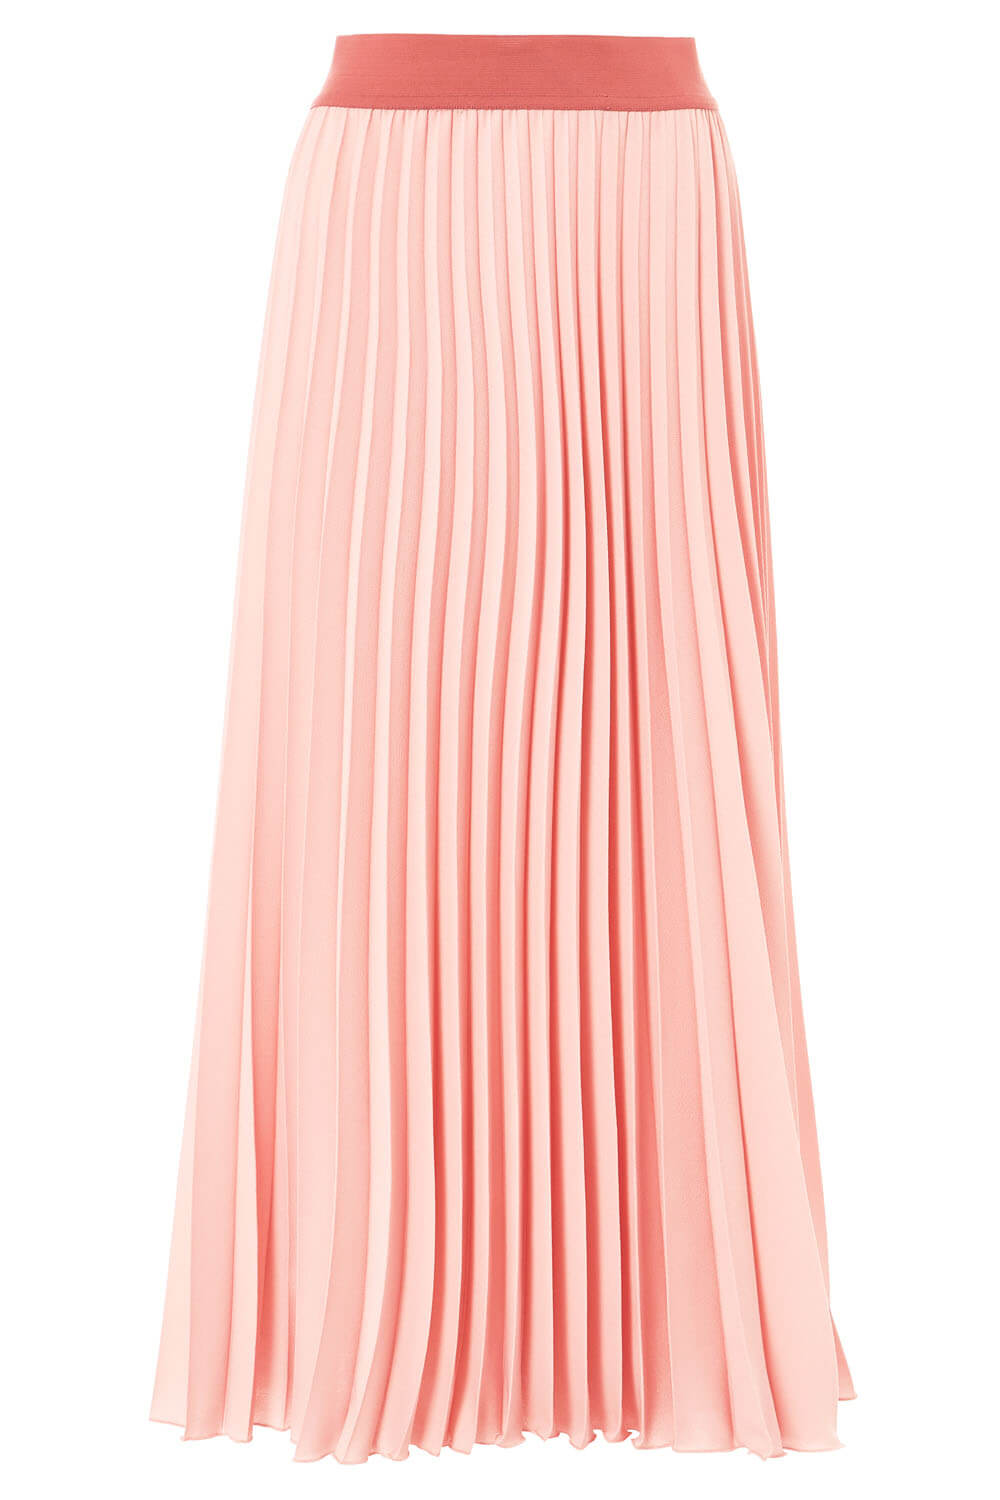 Contrast Band Pleated Maxi Skirt in Light Pink - Roman Originals UK